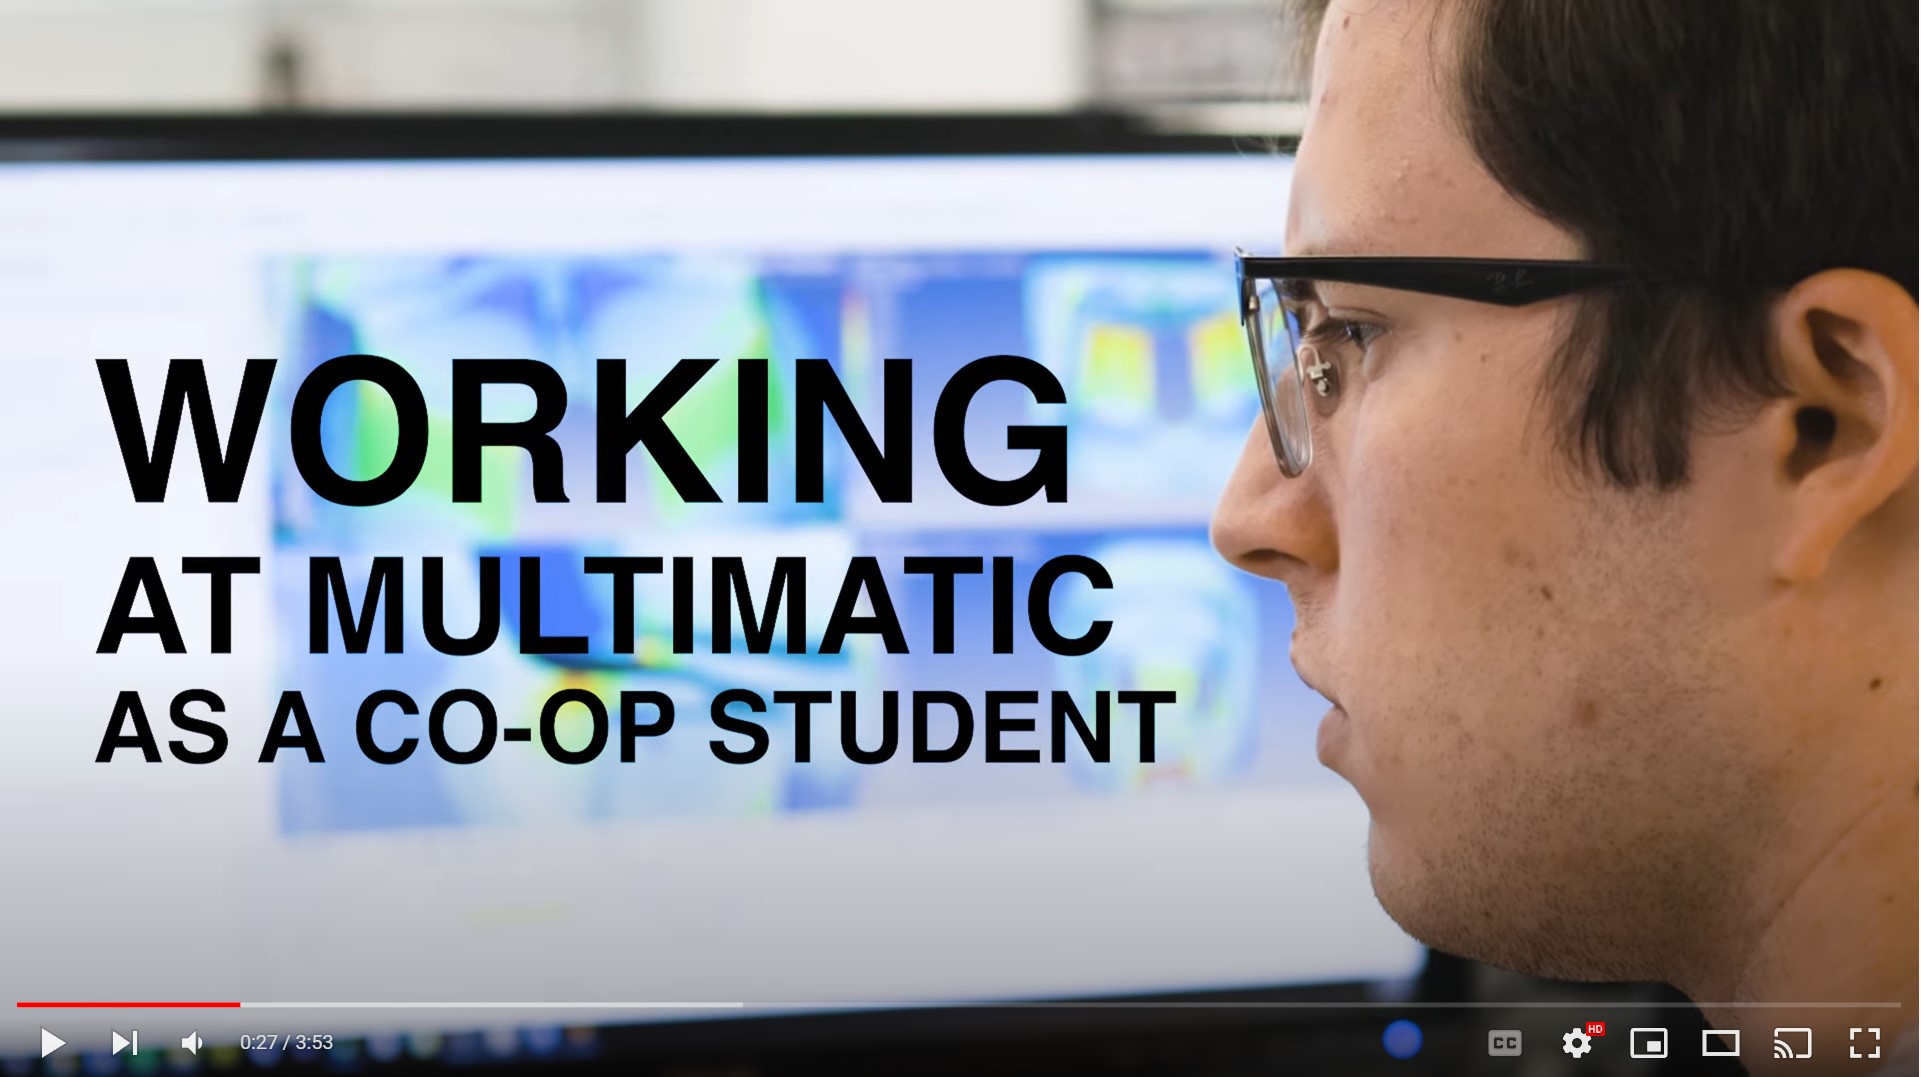 Working at Multimatic as a co-op student